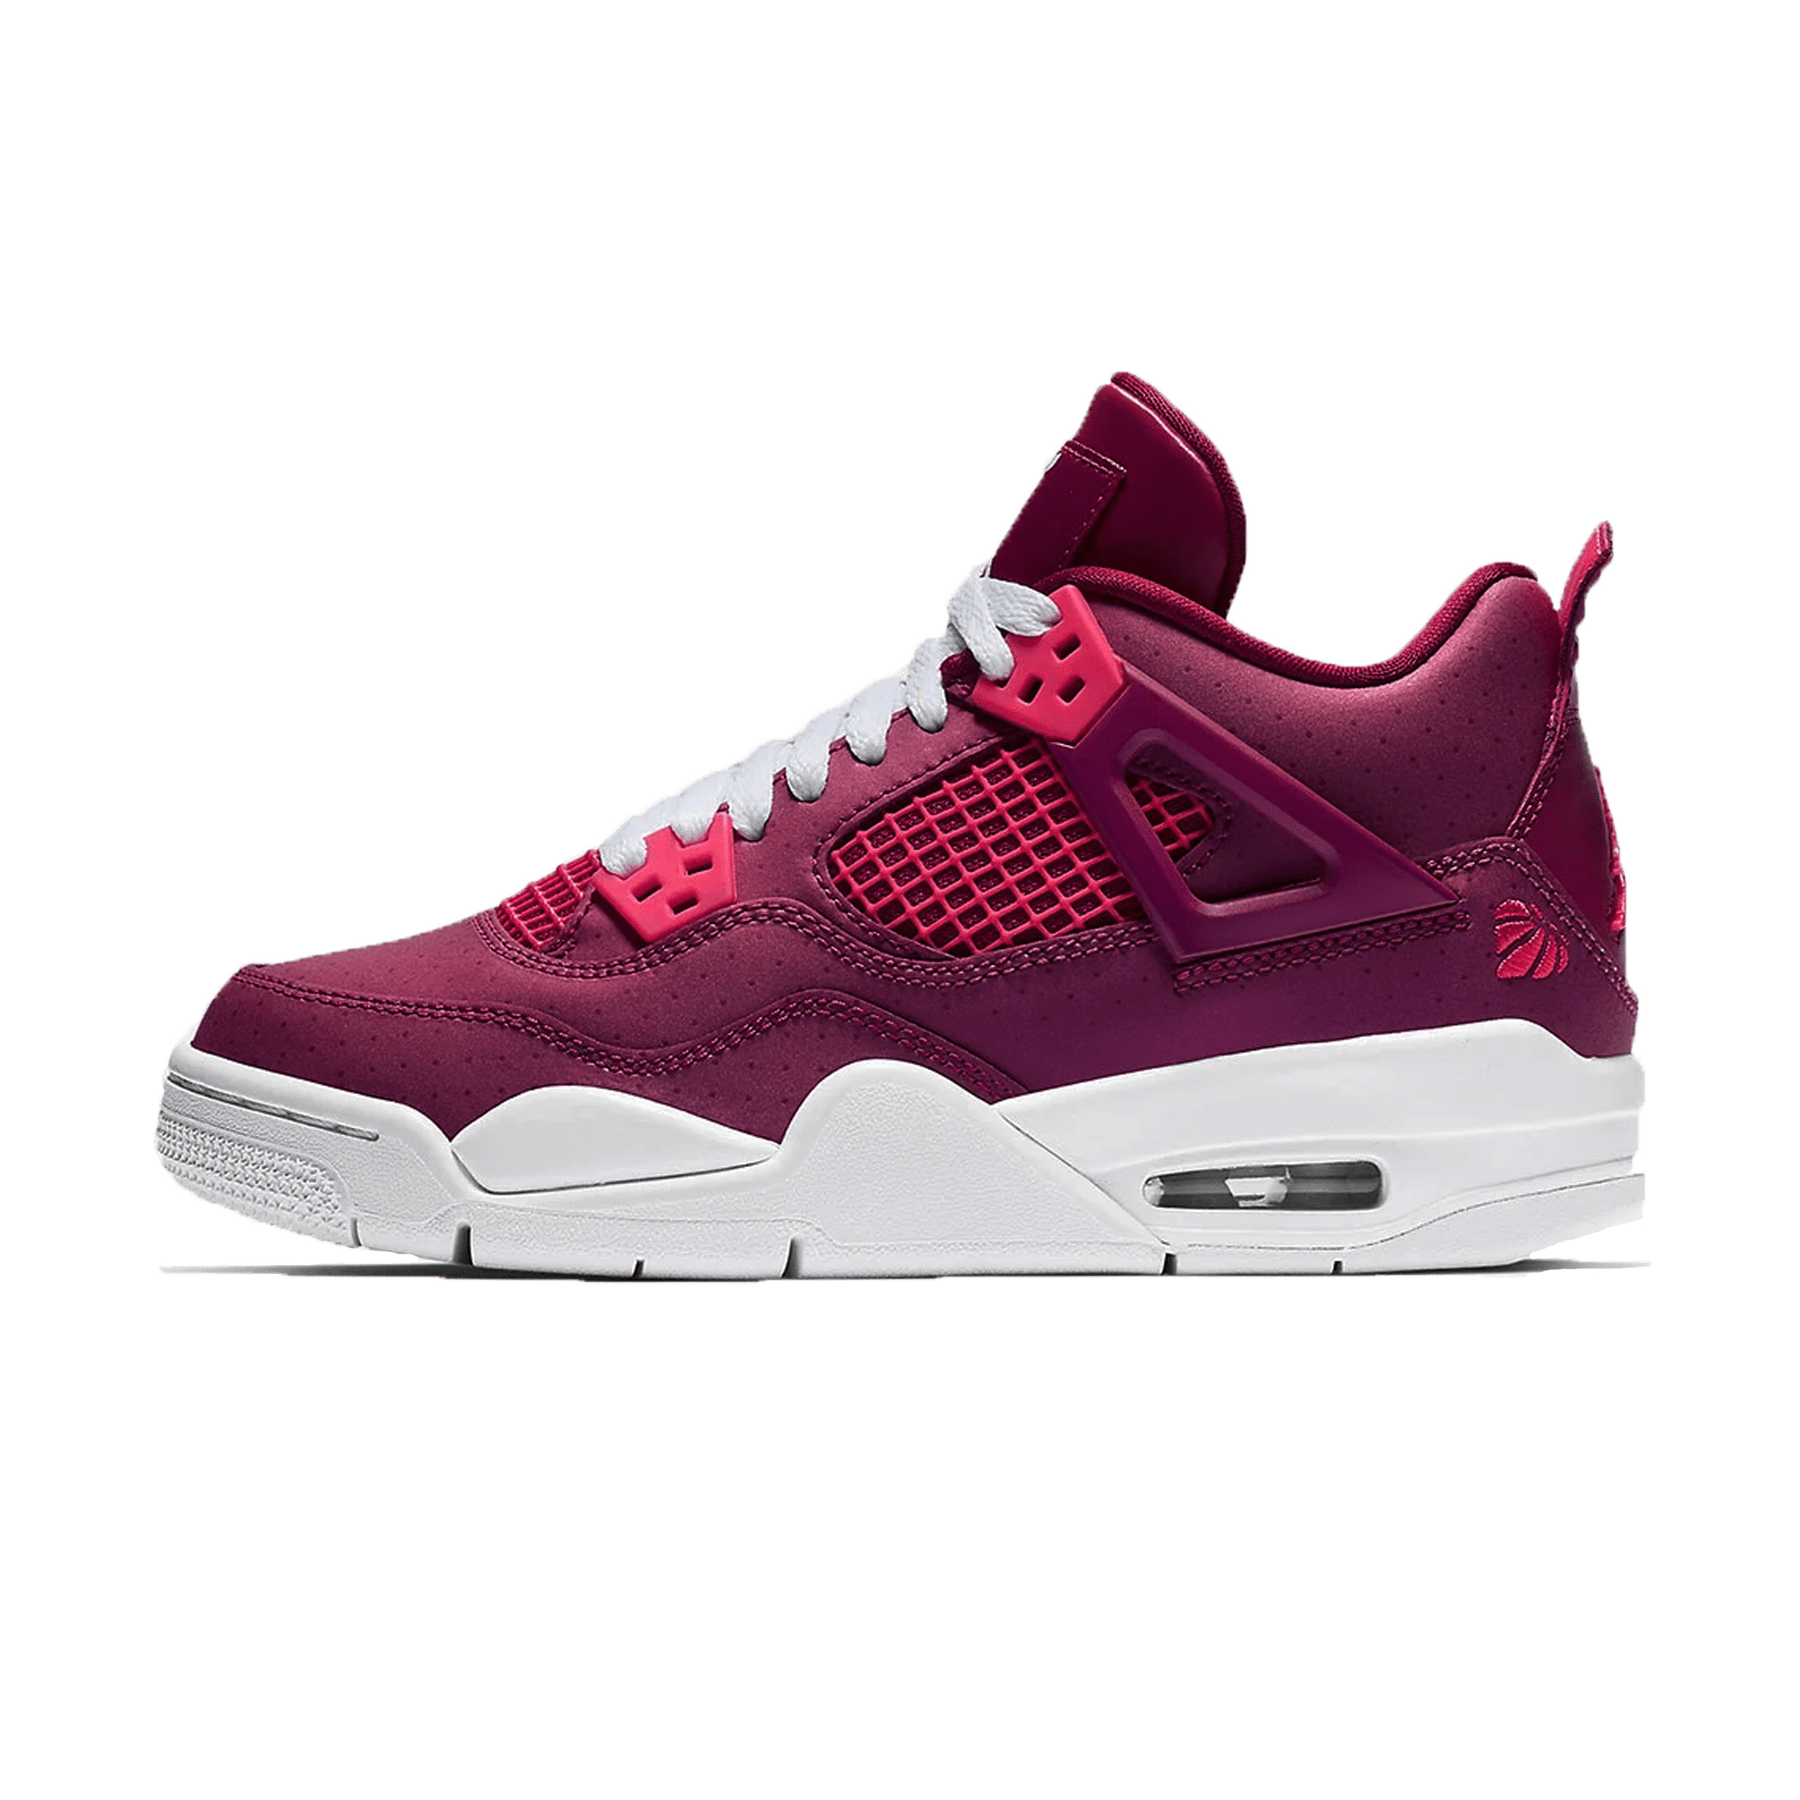 Air Jordan 4 Retro GS For The Love Of The Game 487724 661